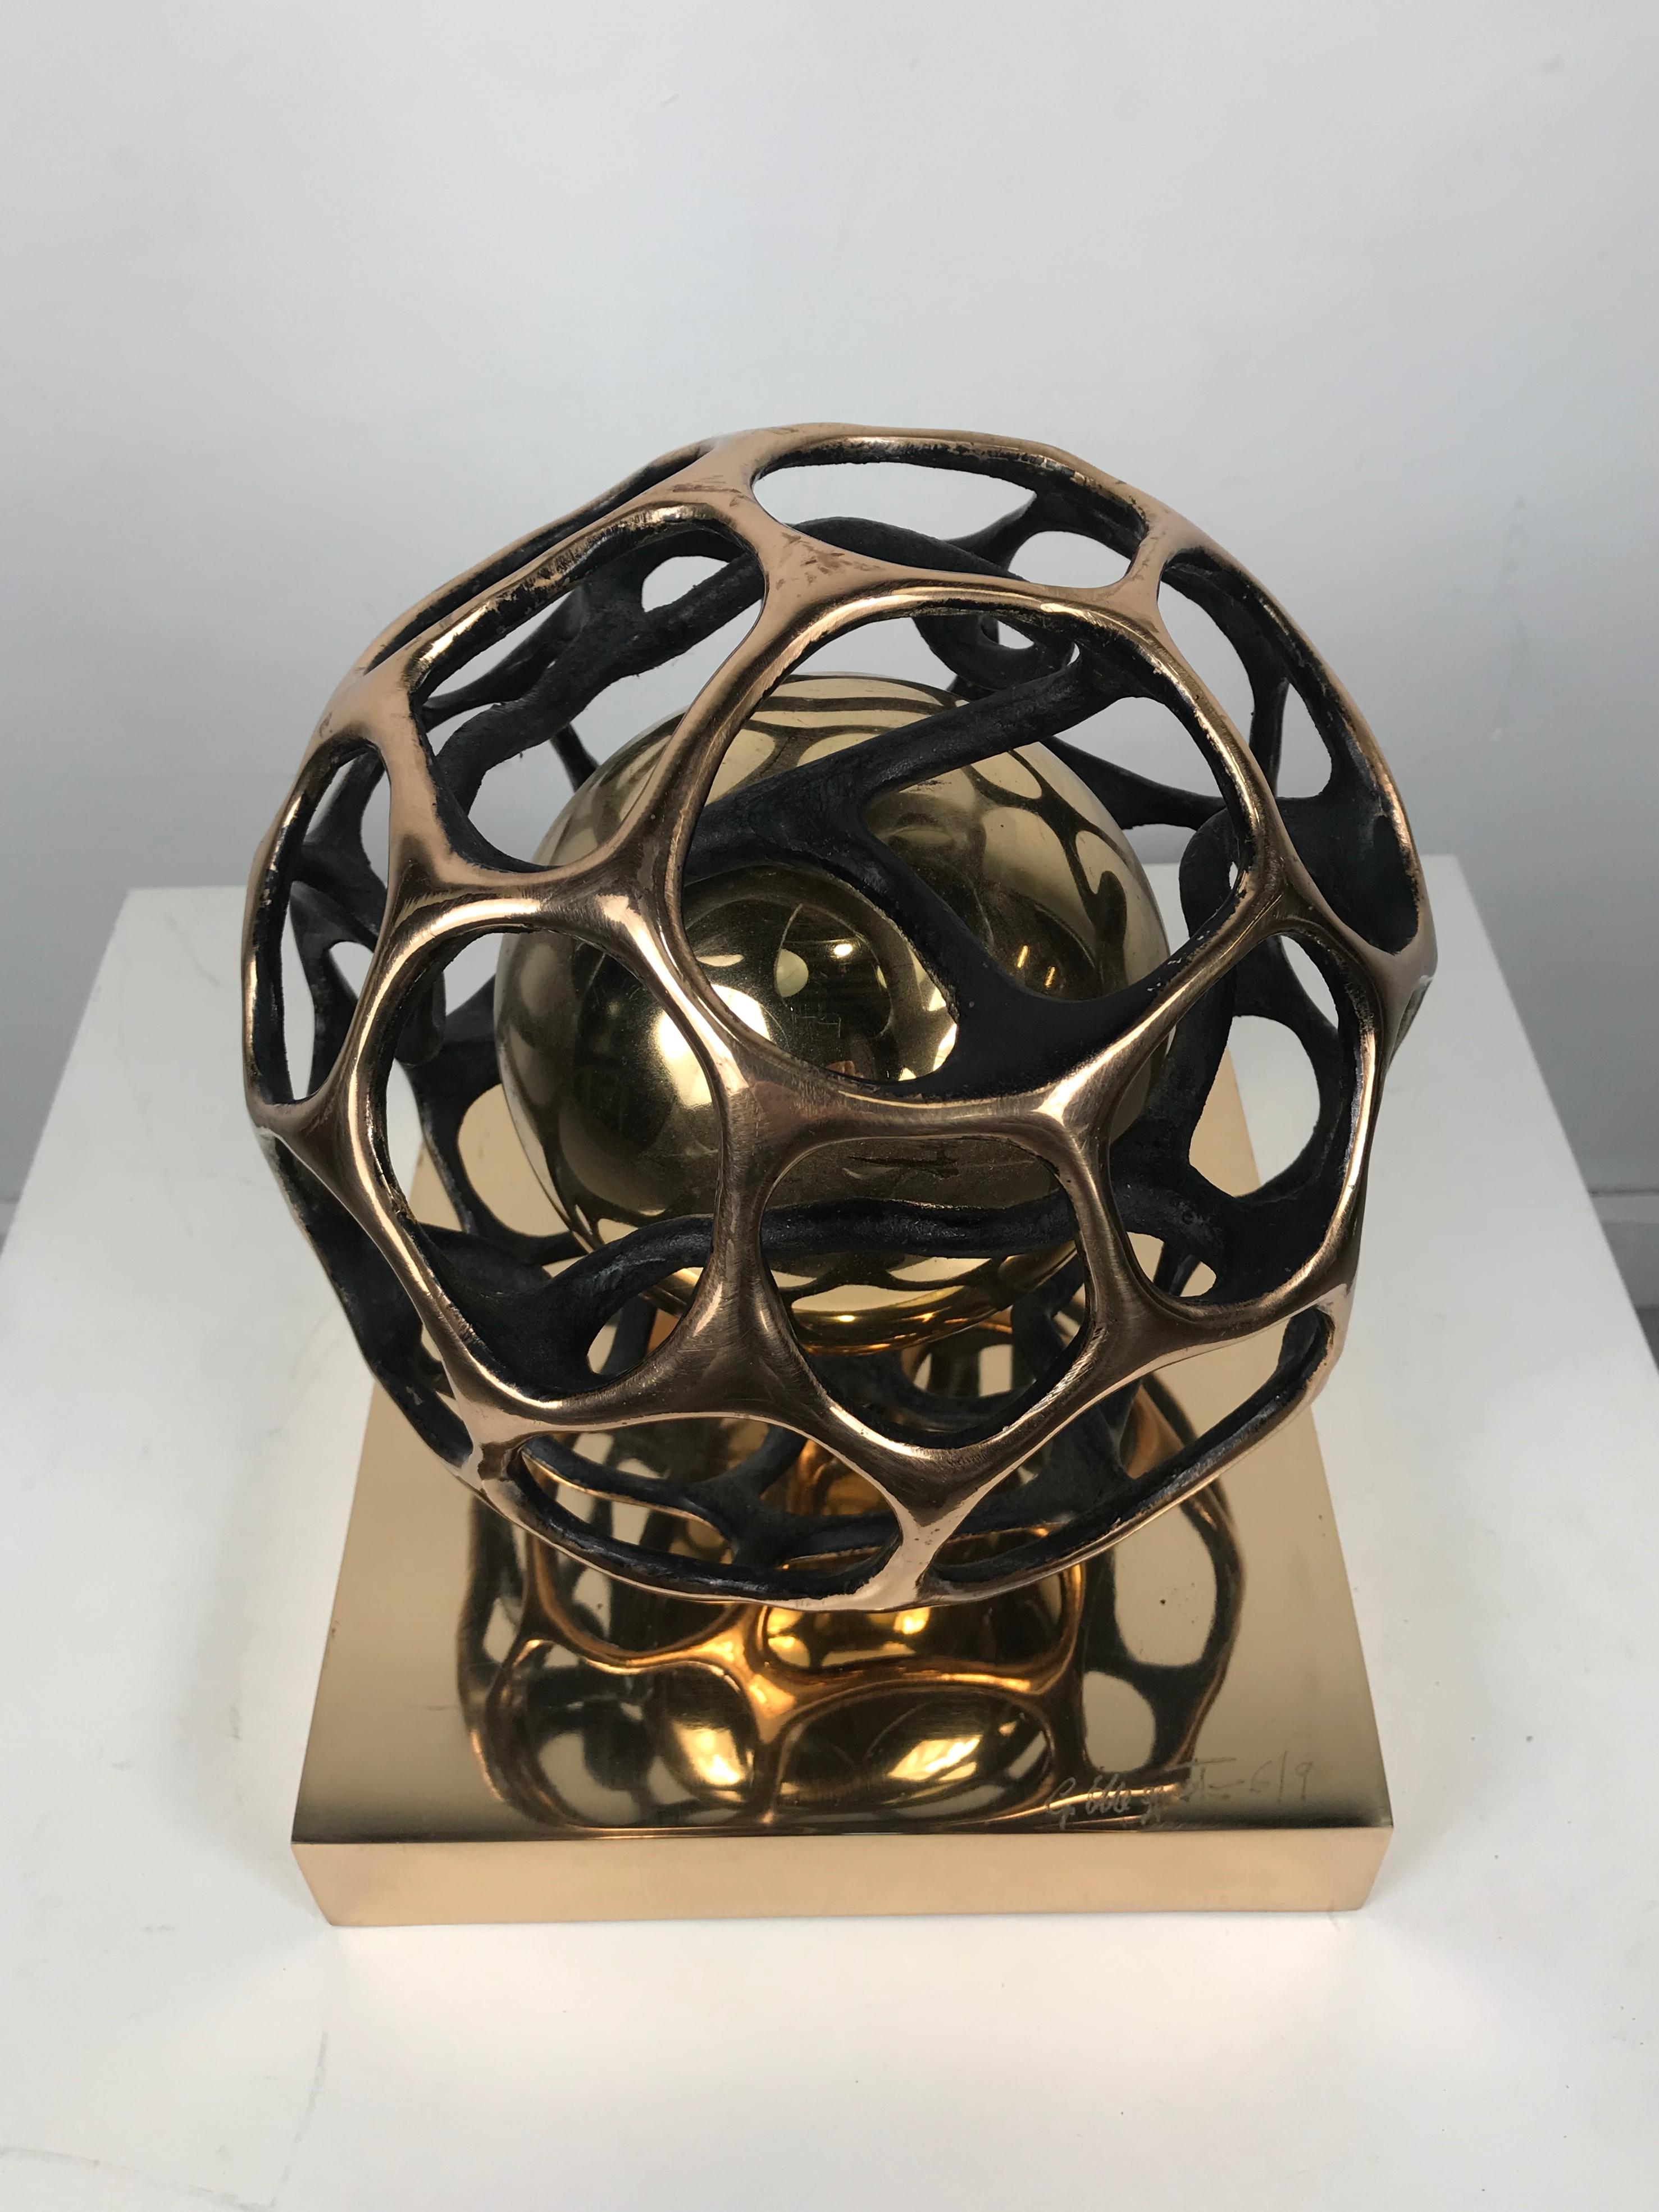 Hand-Crafted Gianfranco Meggiato Bronze Kinetic Sculpture 2007 